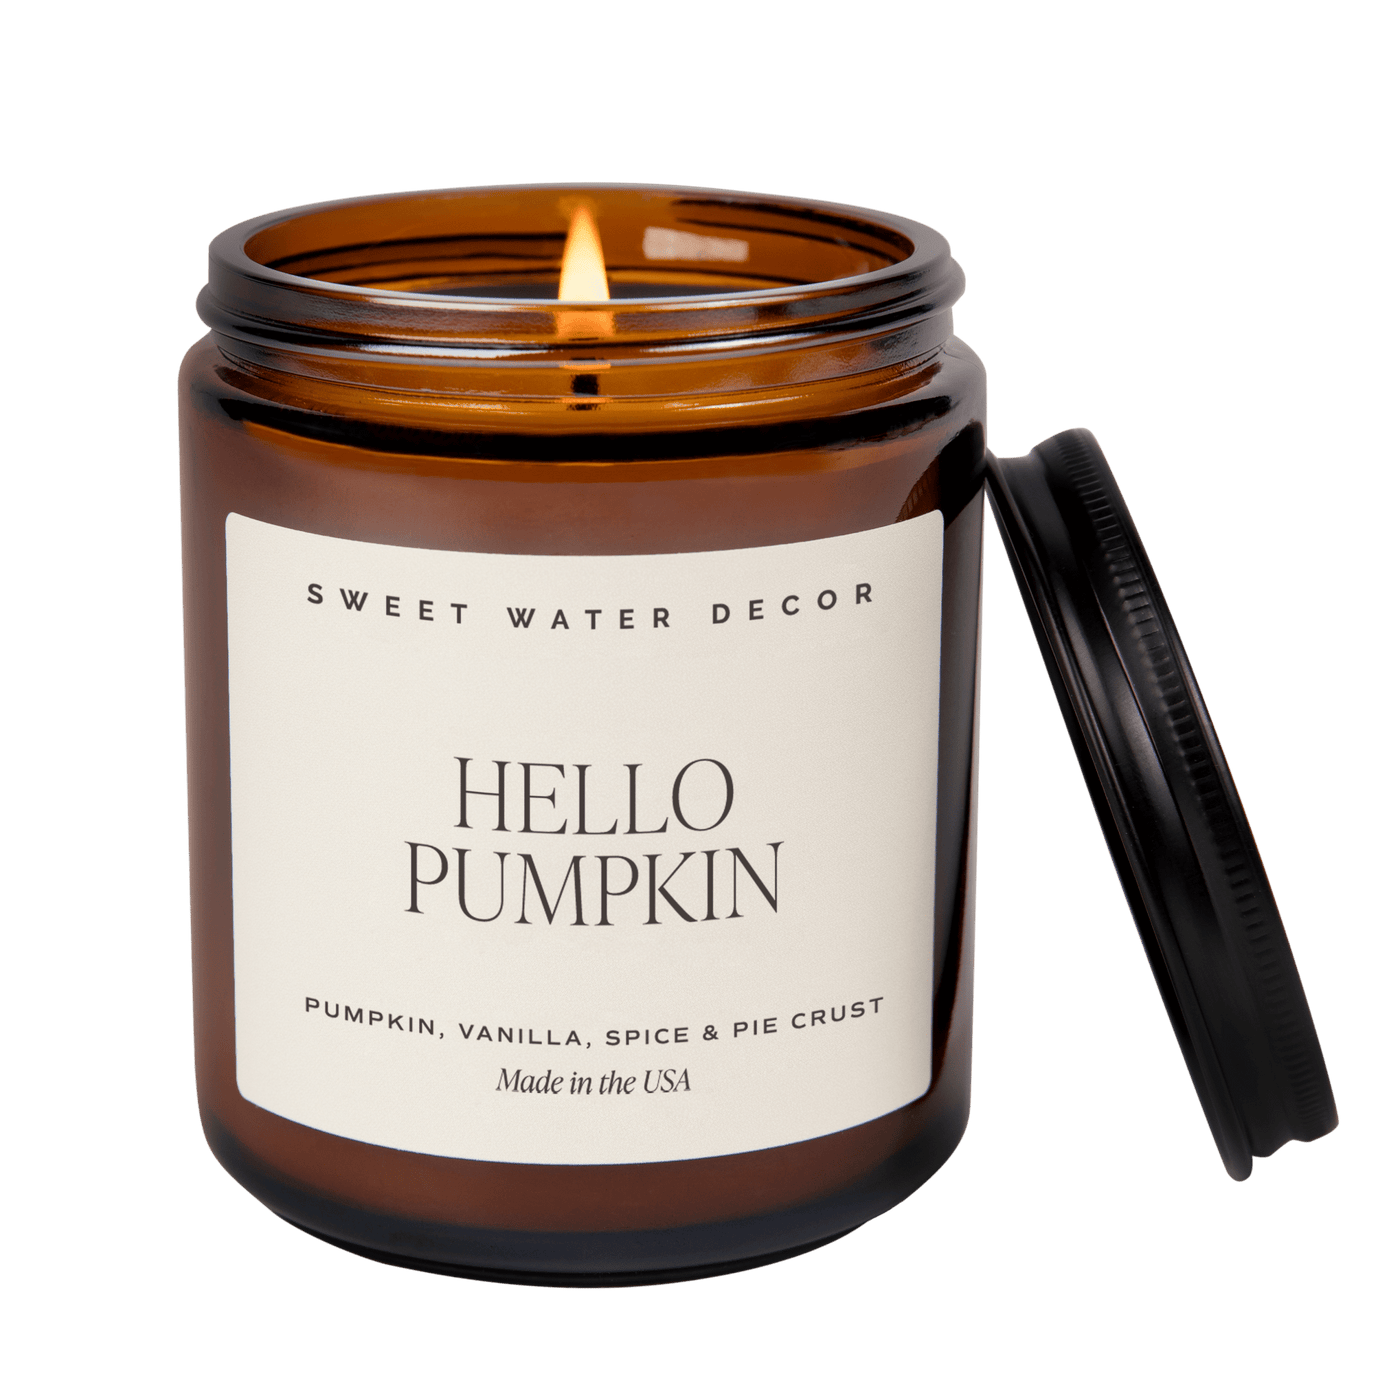 Hello Pumpkin Soy Candle - Amber Jar - 9 oz - Sweet Water Decor - Candles